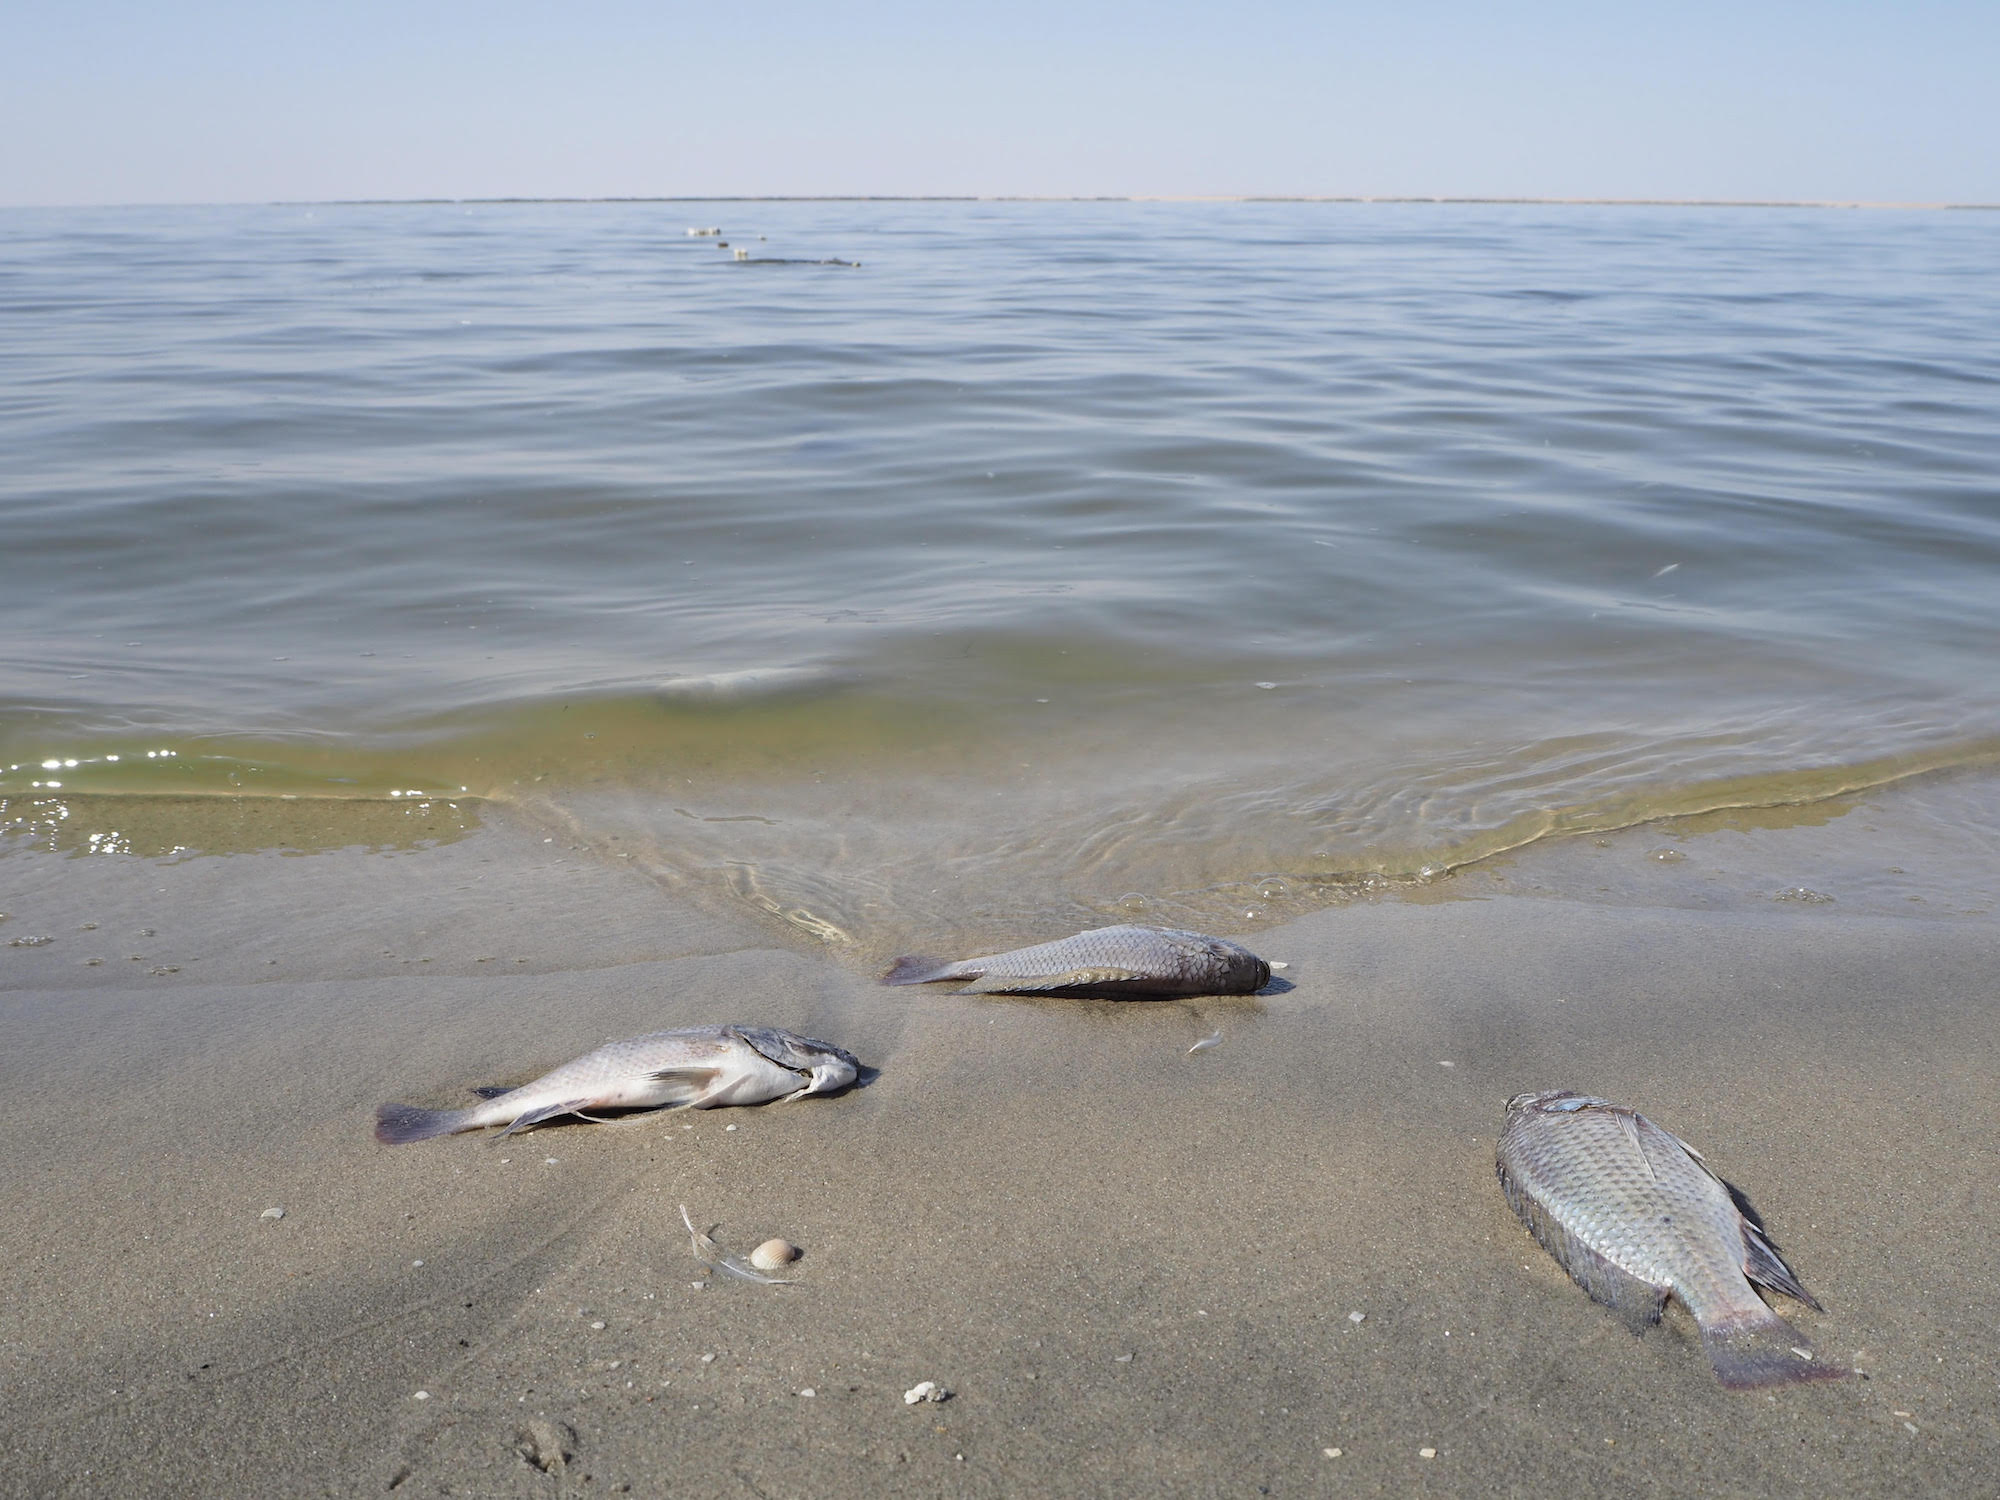 Dead fish on the shores of Iraq's Lake Razzaza, which local fishermen say has been shrinking and becoming saline (MEE/Tom Westcott)